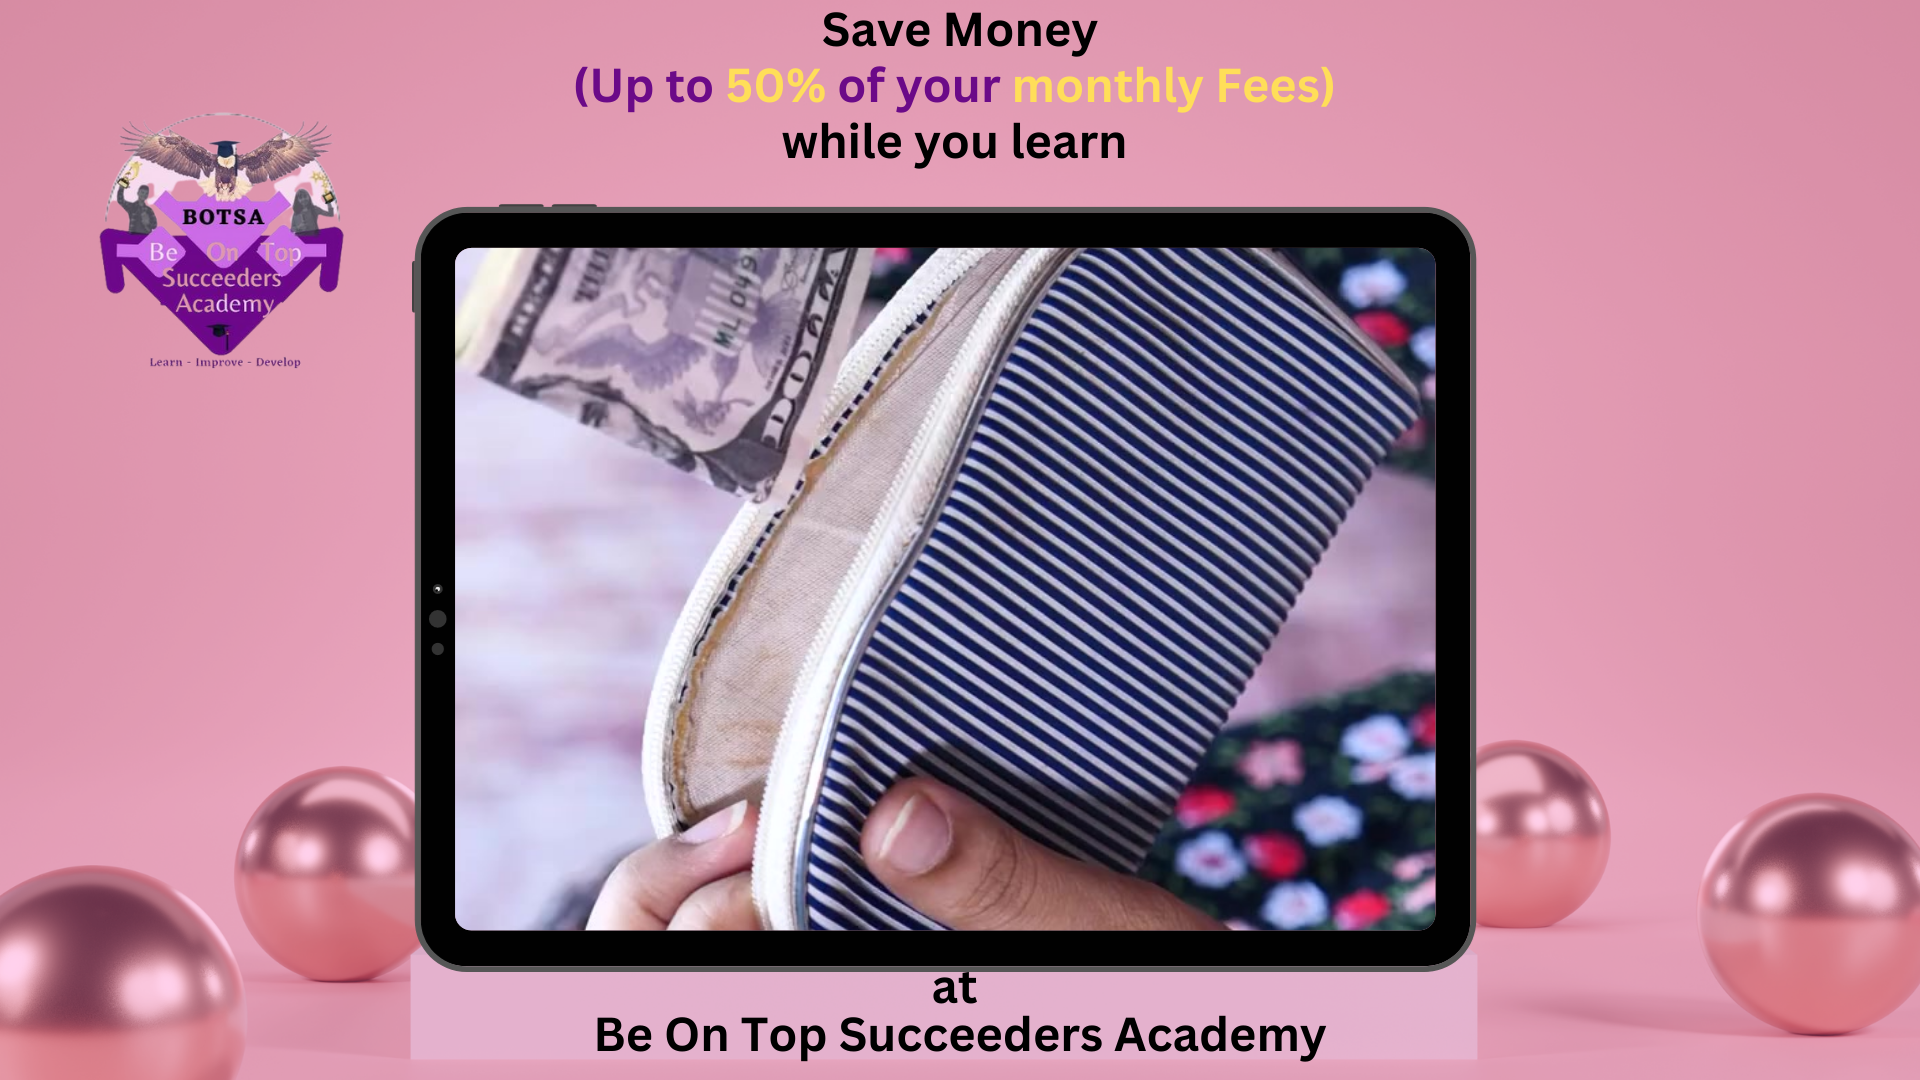 Load video: Save Money while you learn at Be On Top Succeeders Academy  If you are a registered students with us for at least 3 year, you can learn more and sign up for this program. Text the phrase &quot;Save Money&quot; to 1-868-310-6362   Go to www.beontopcity.com for a FREE eBook  #savemoney  #learning  #studentbenefits